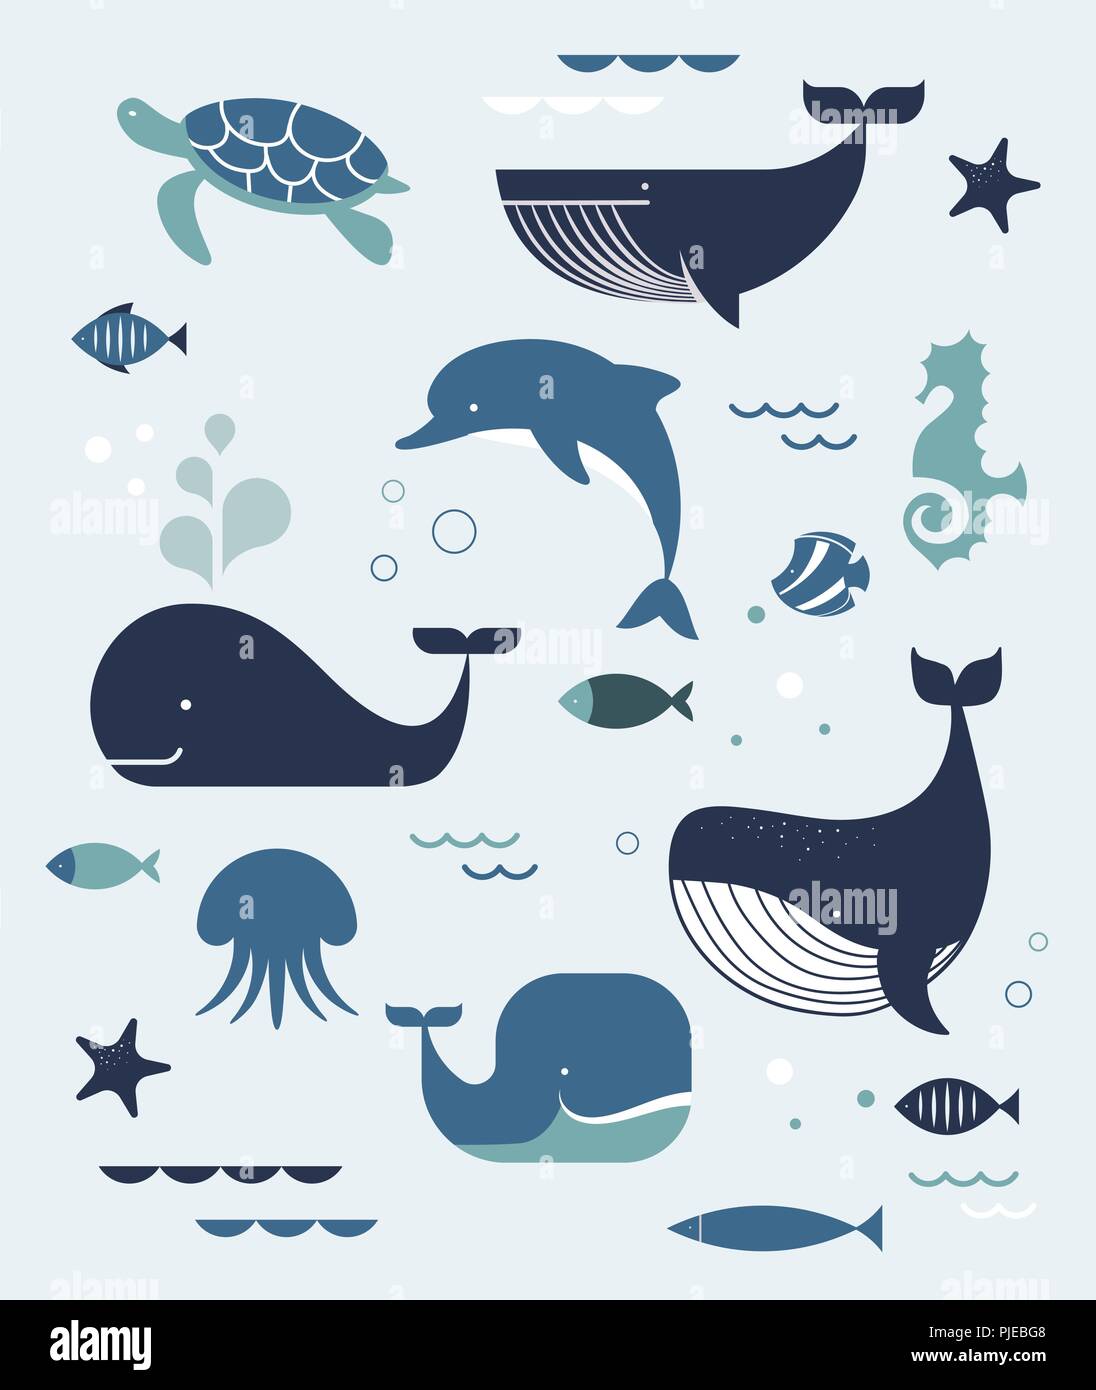 Sea life, whales, dolphins icons and illustrations, poster design Stock Vector